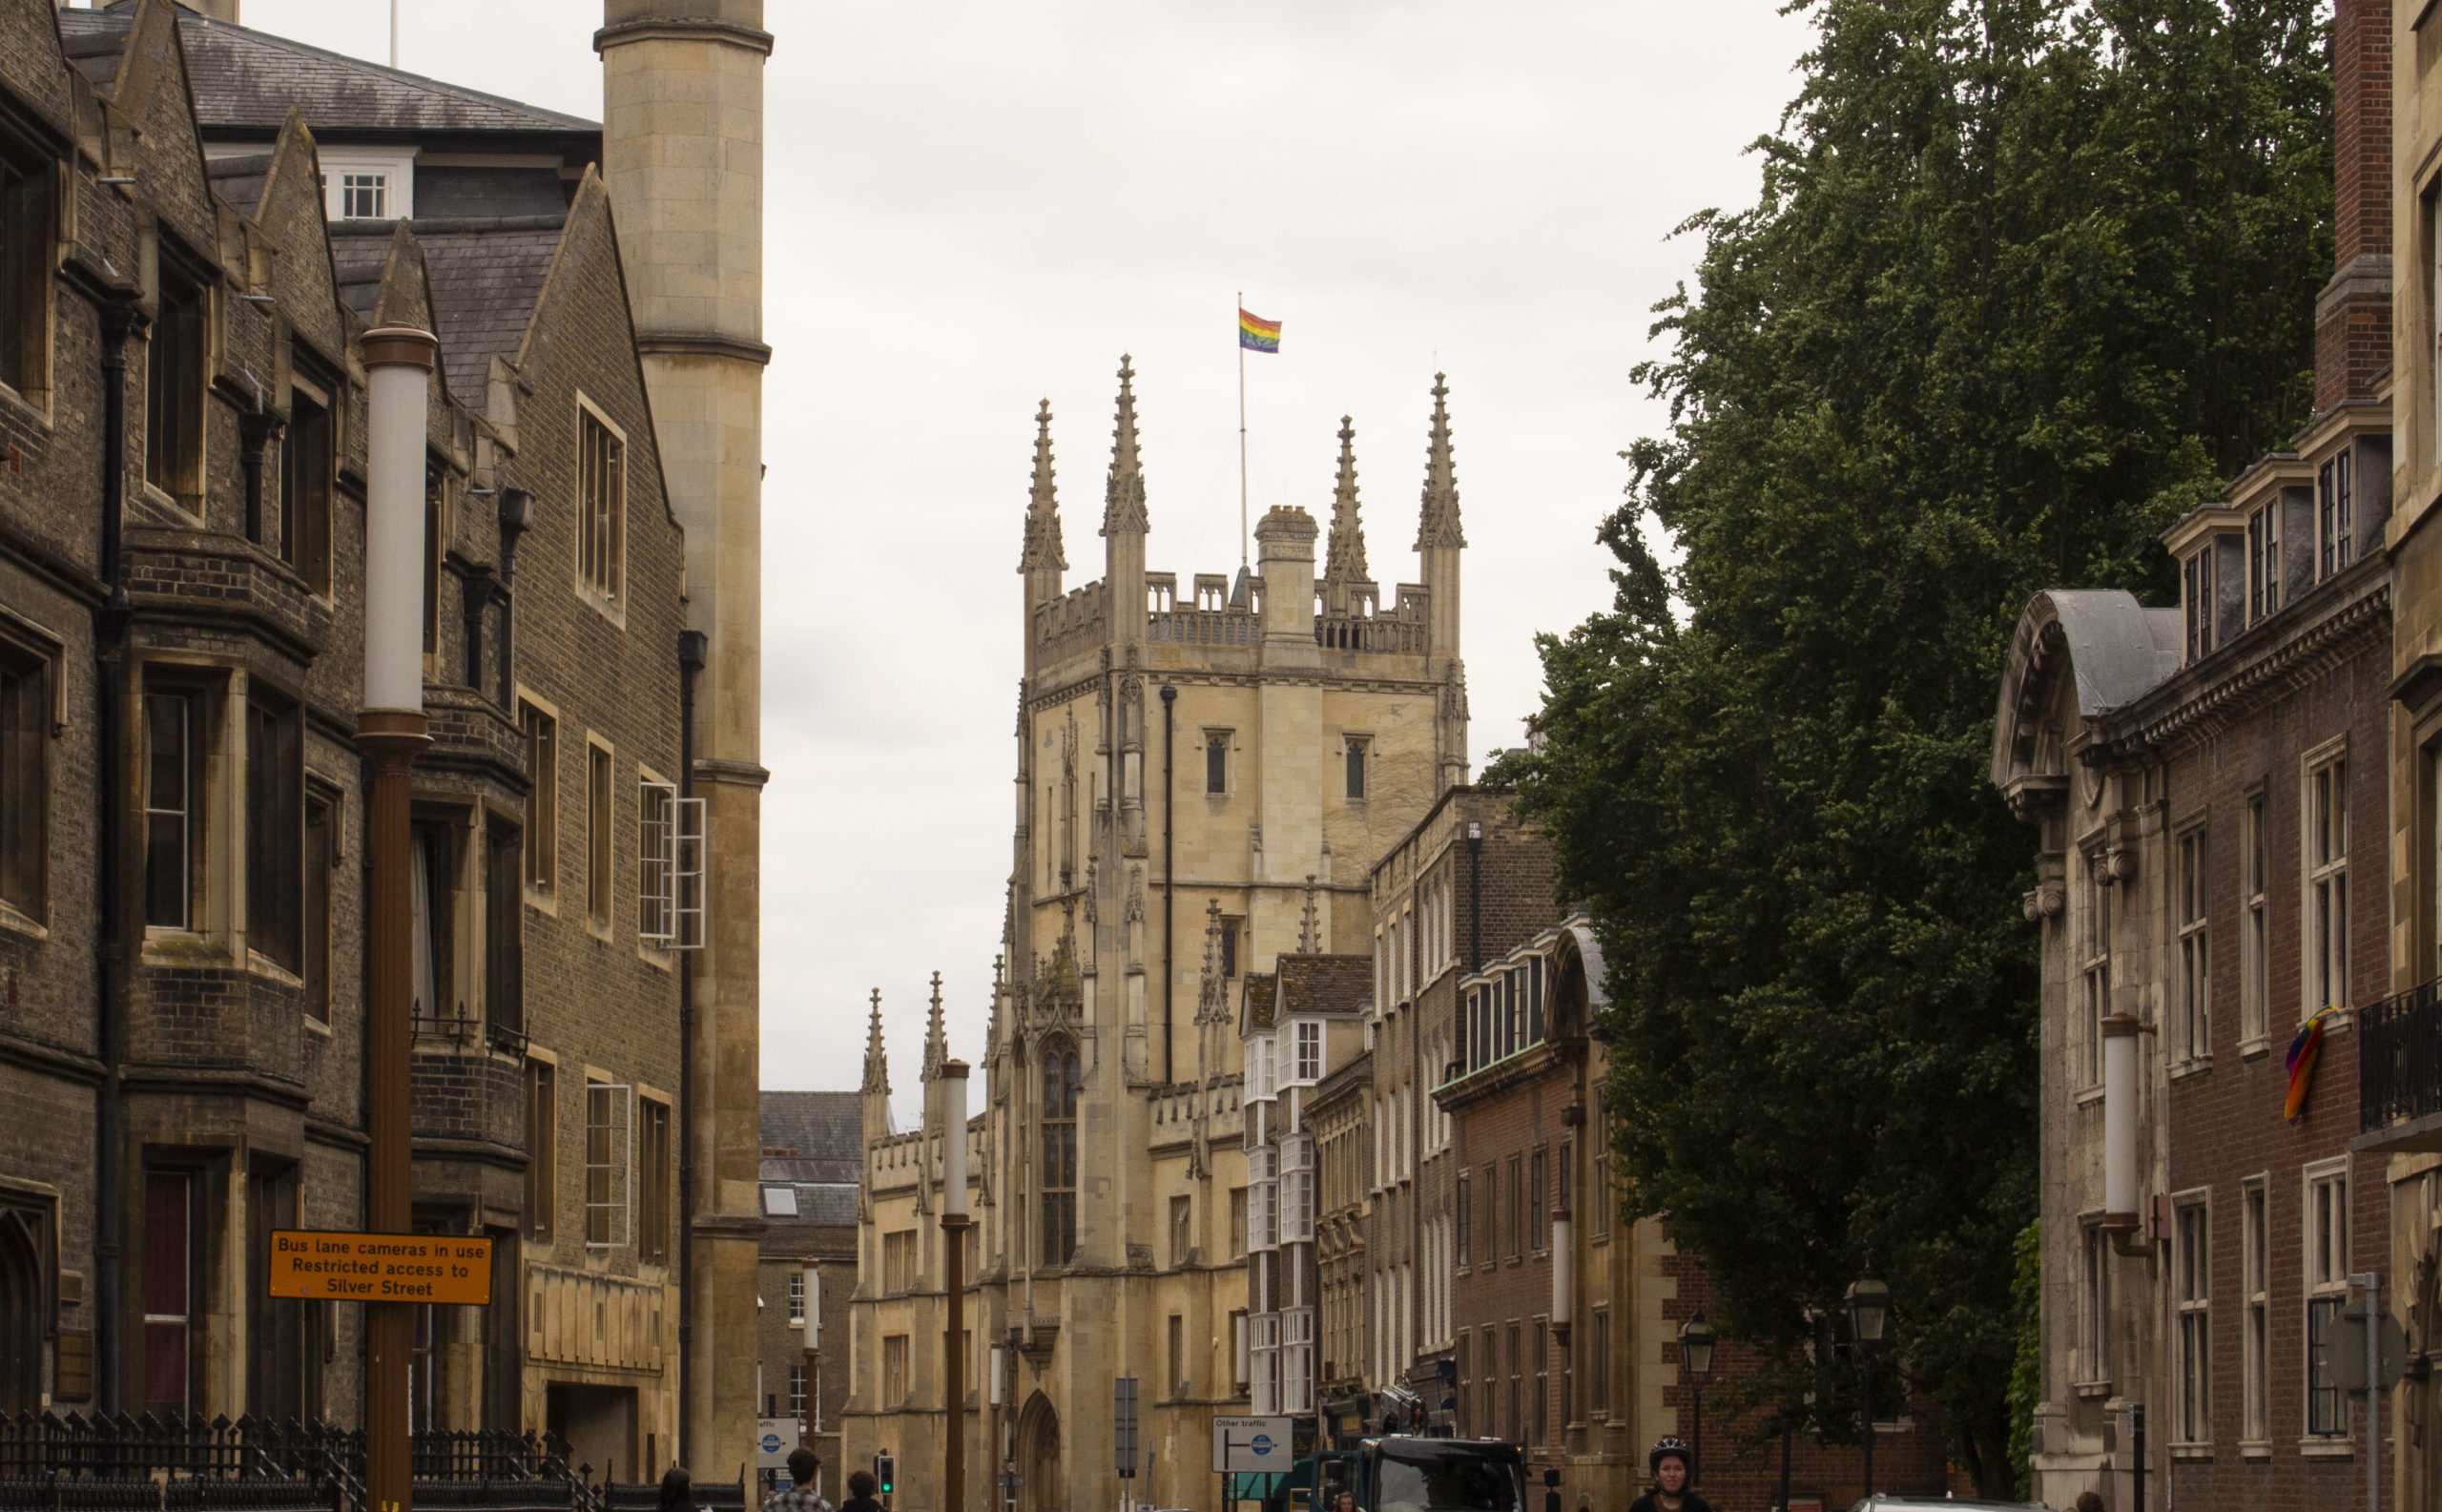 Tower in Cambridge with Pride flag